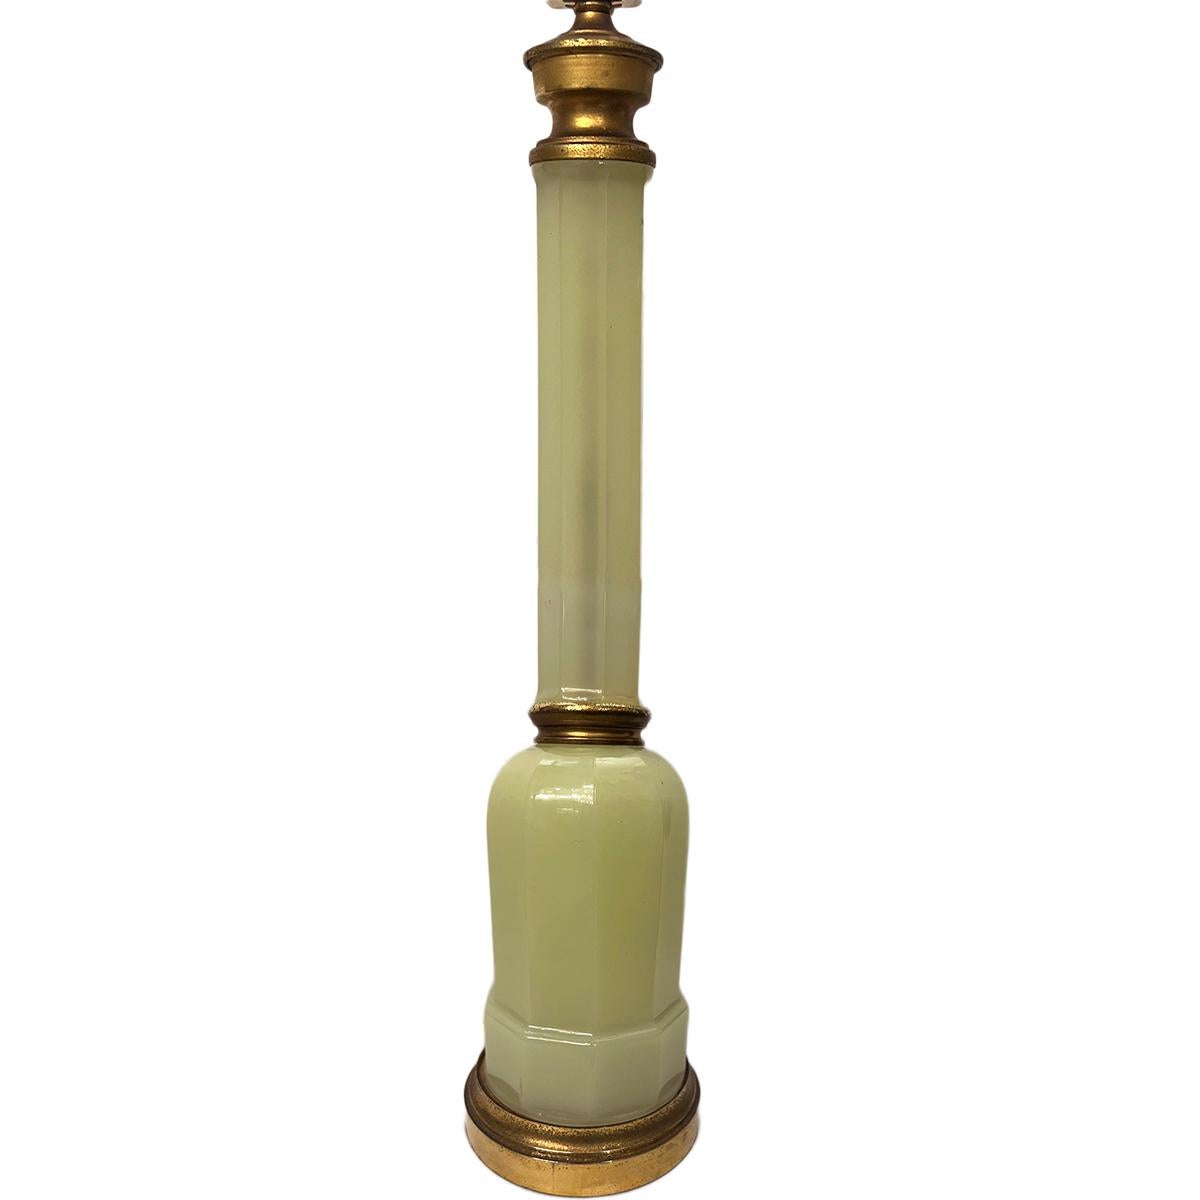 A circa 1920s French opaline glass table lamp.

Measurements:
Height of body: 22.5